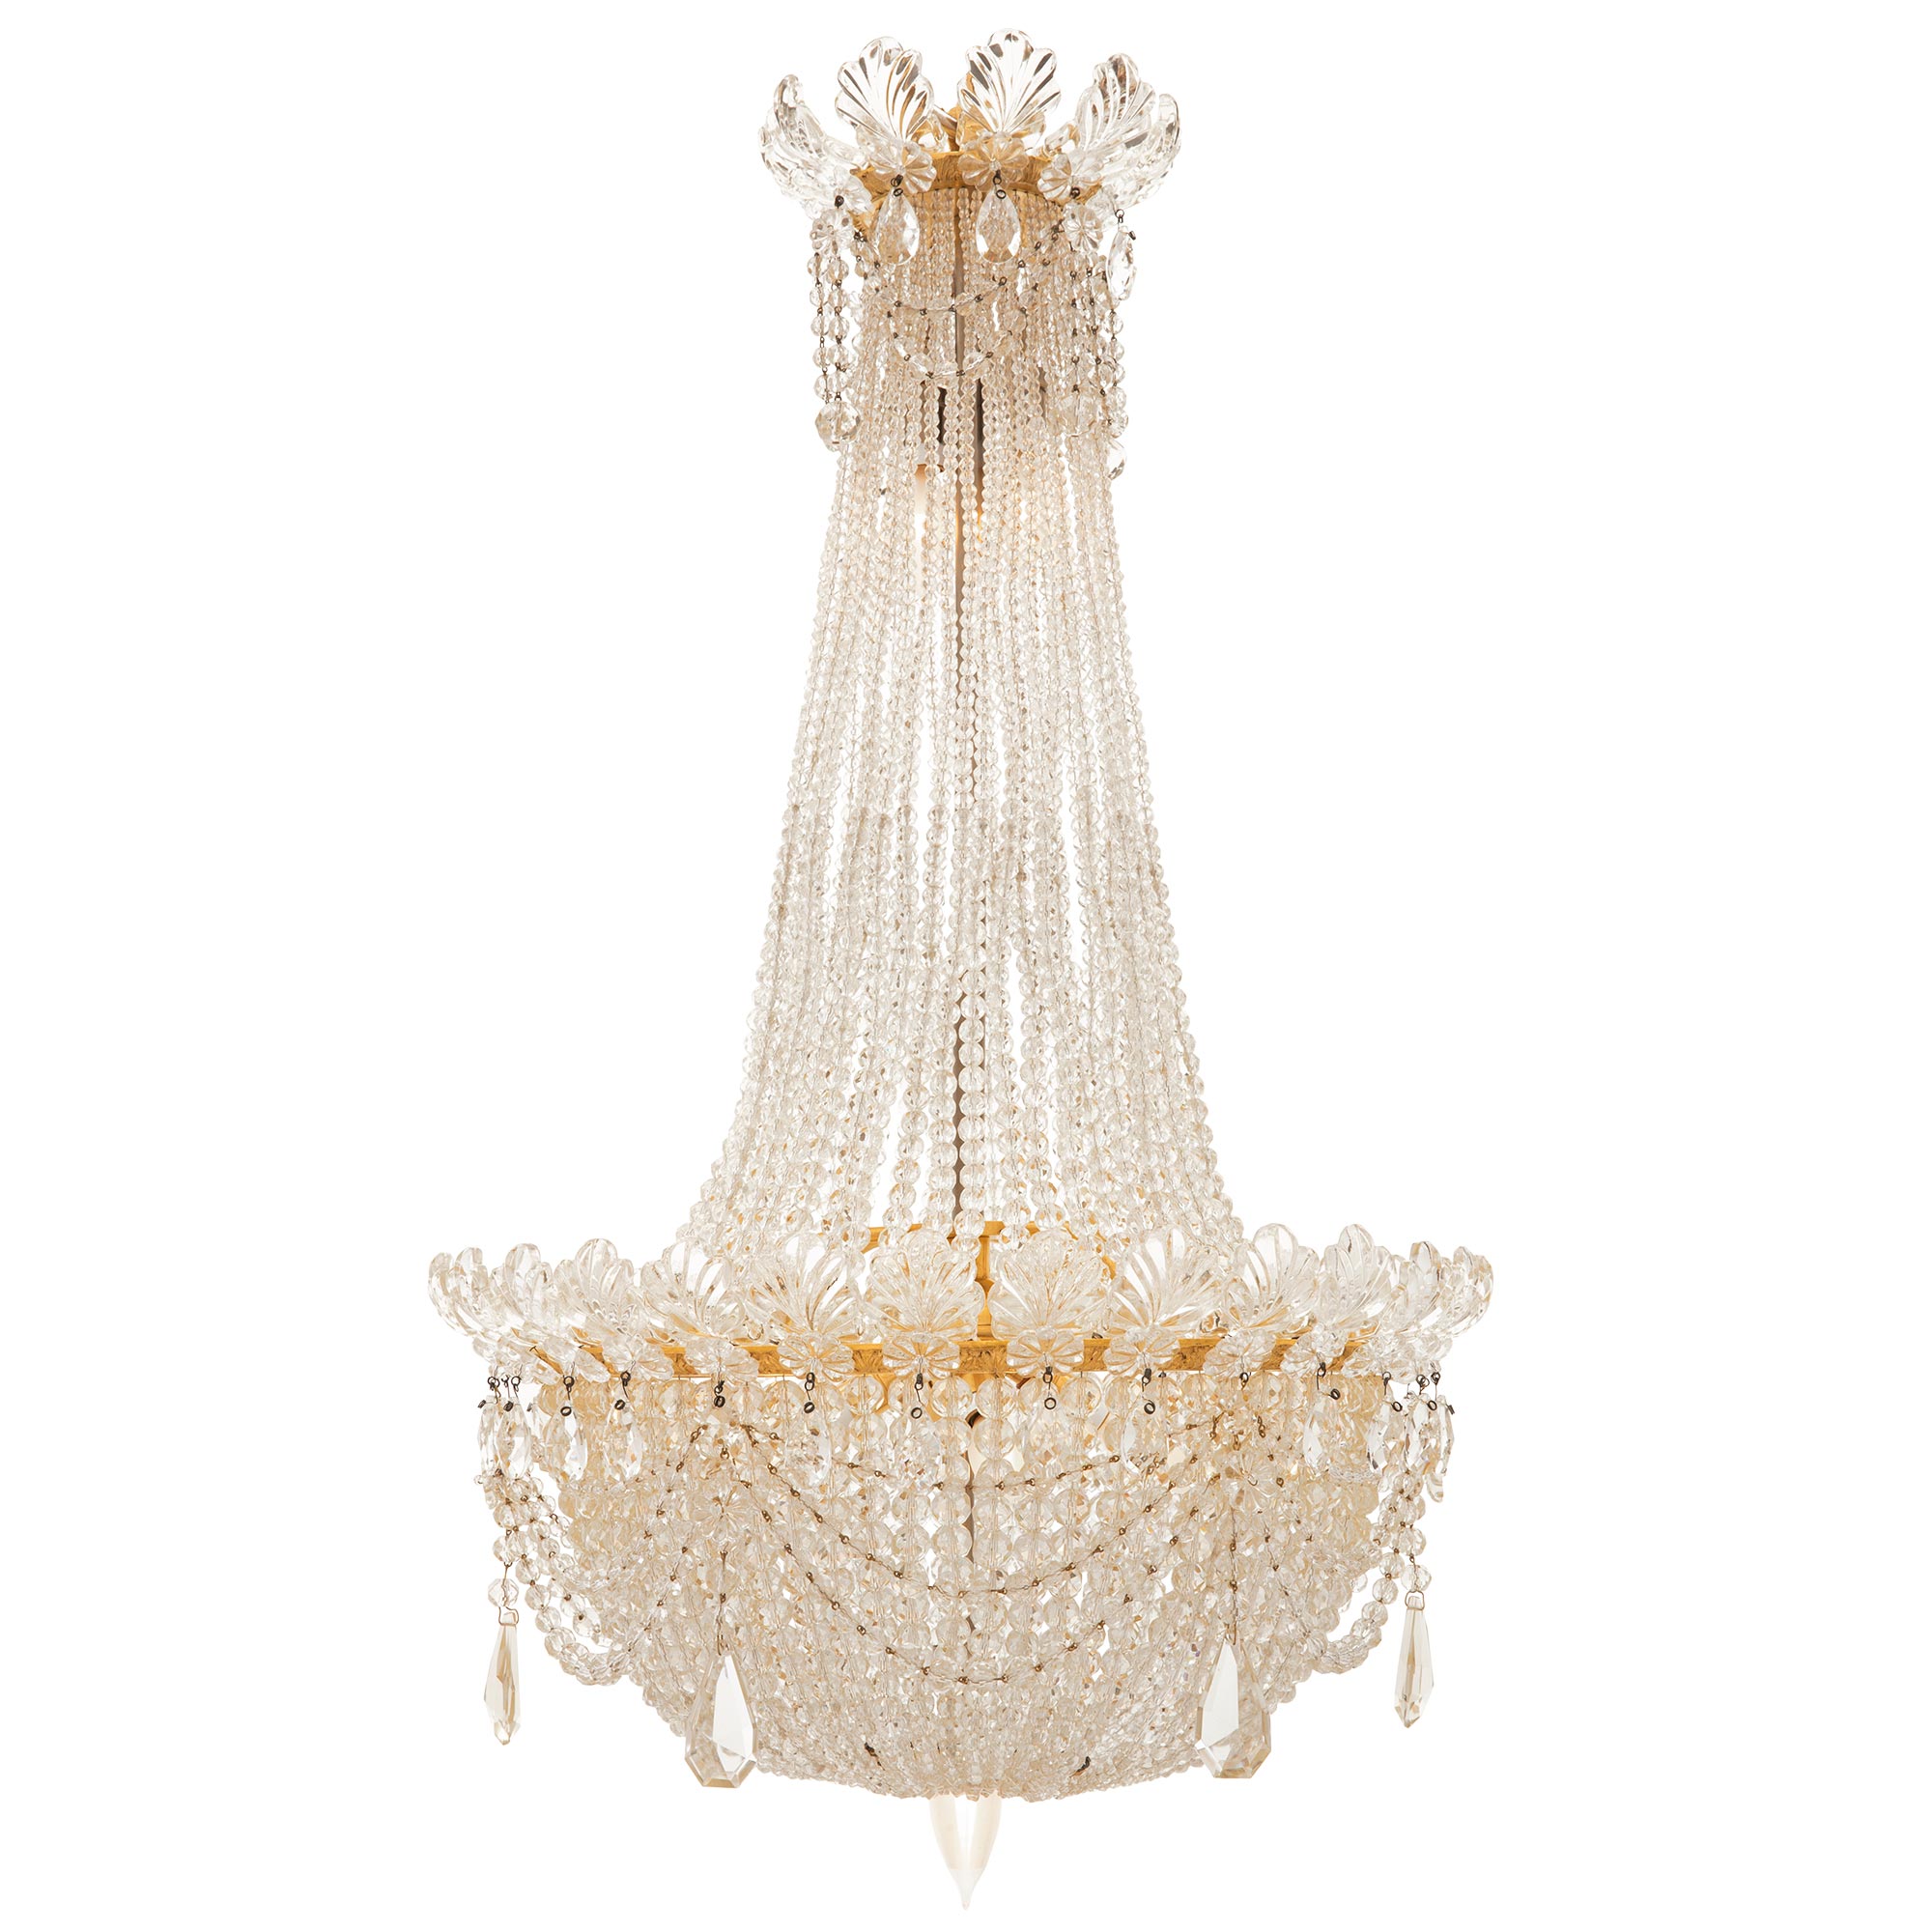 French 19th Century Belle Époque Period Baccarat Crystal and Ormolu Chandelier For Sale